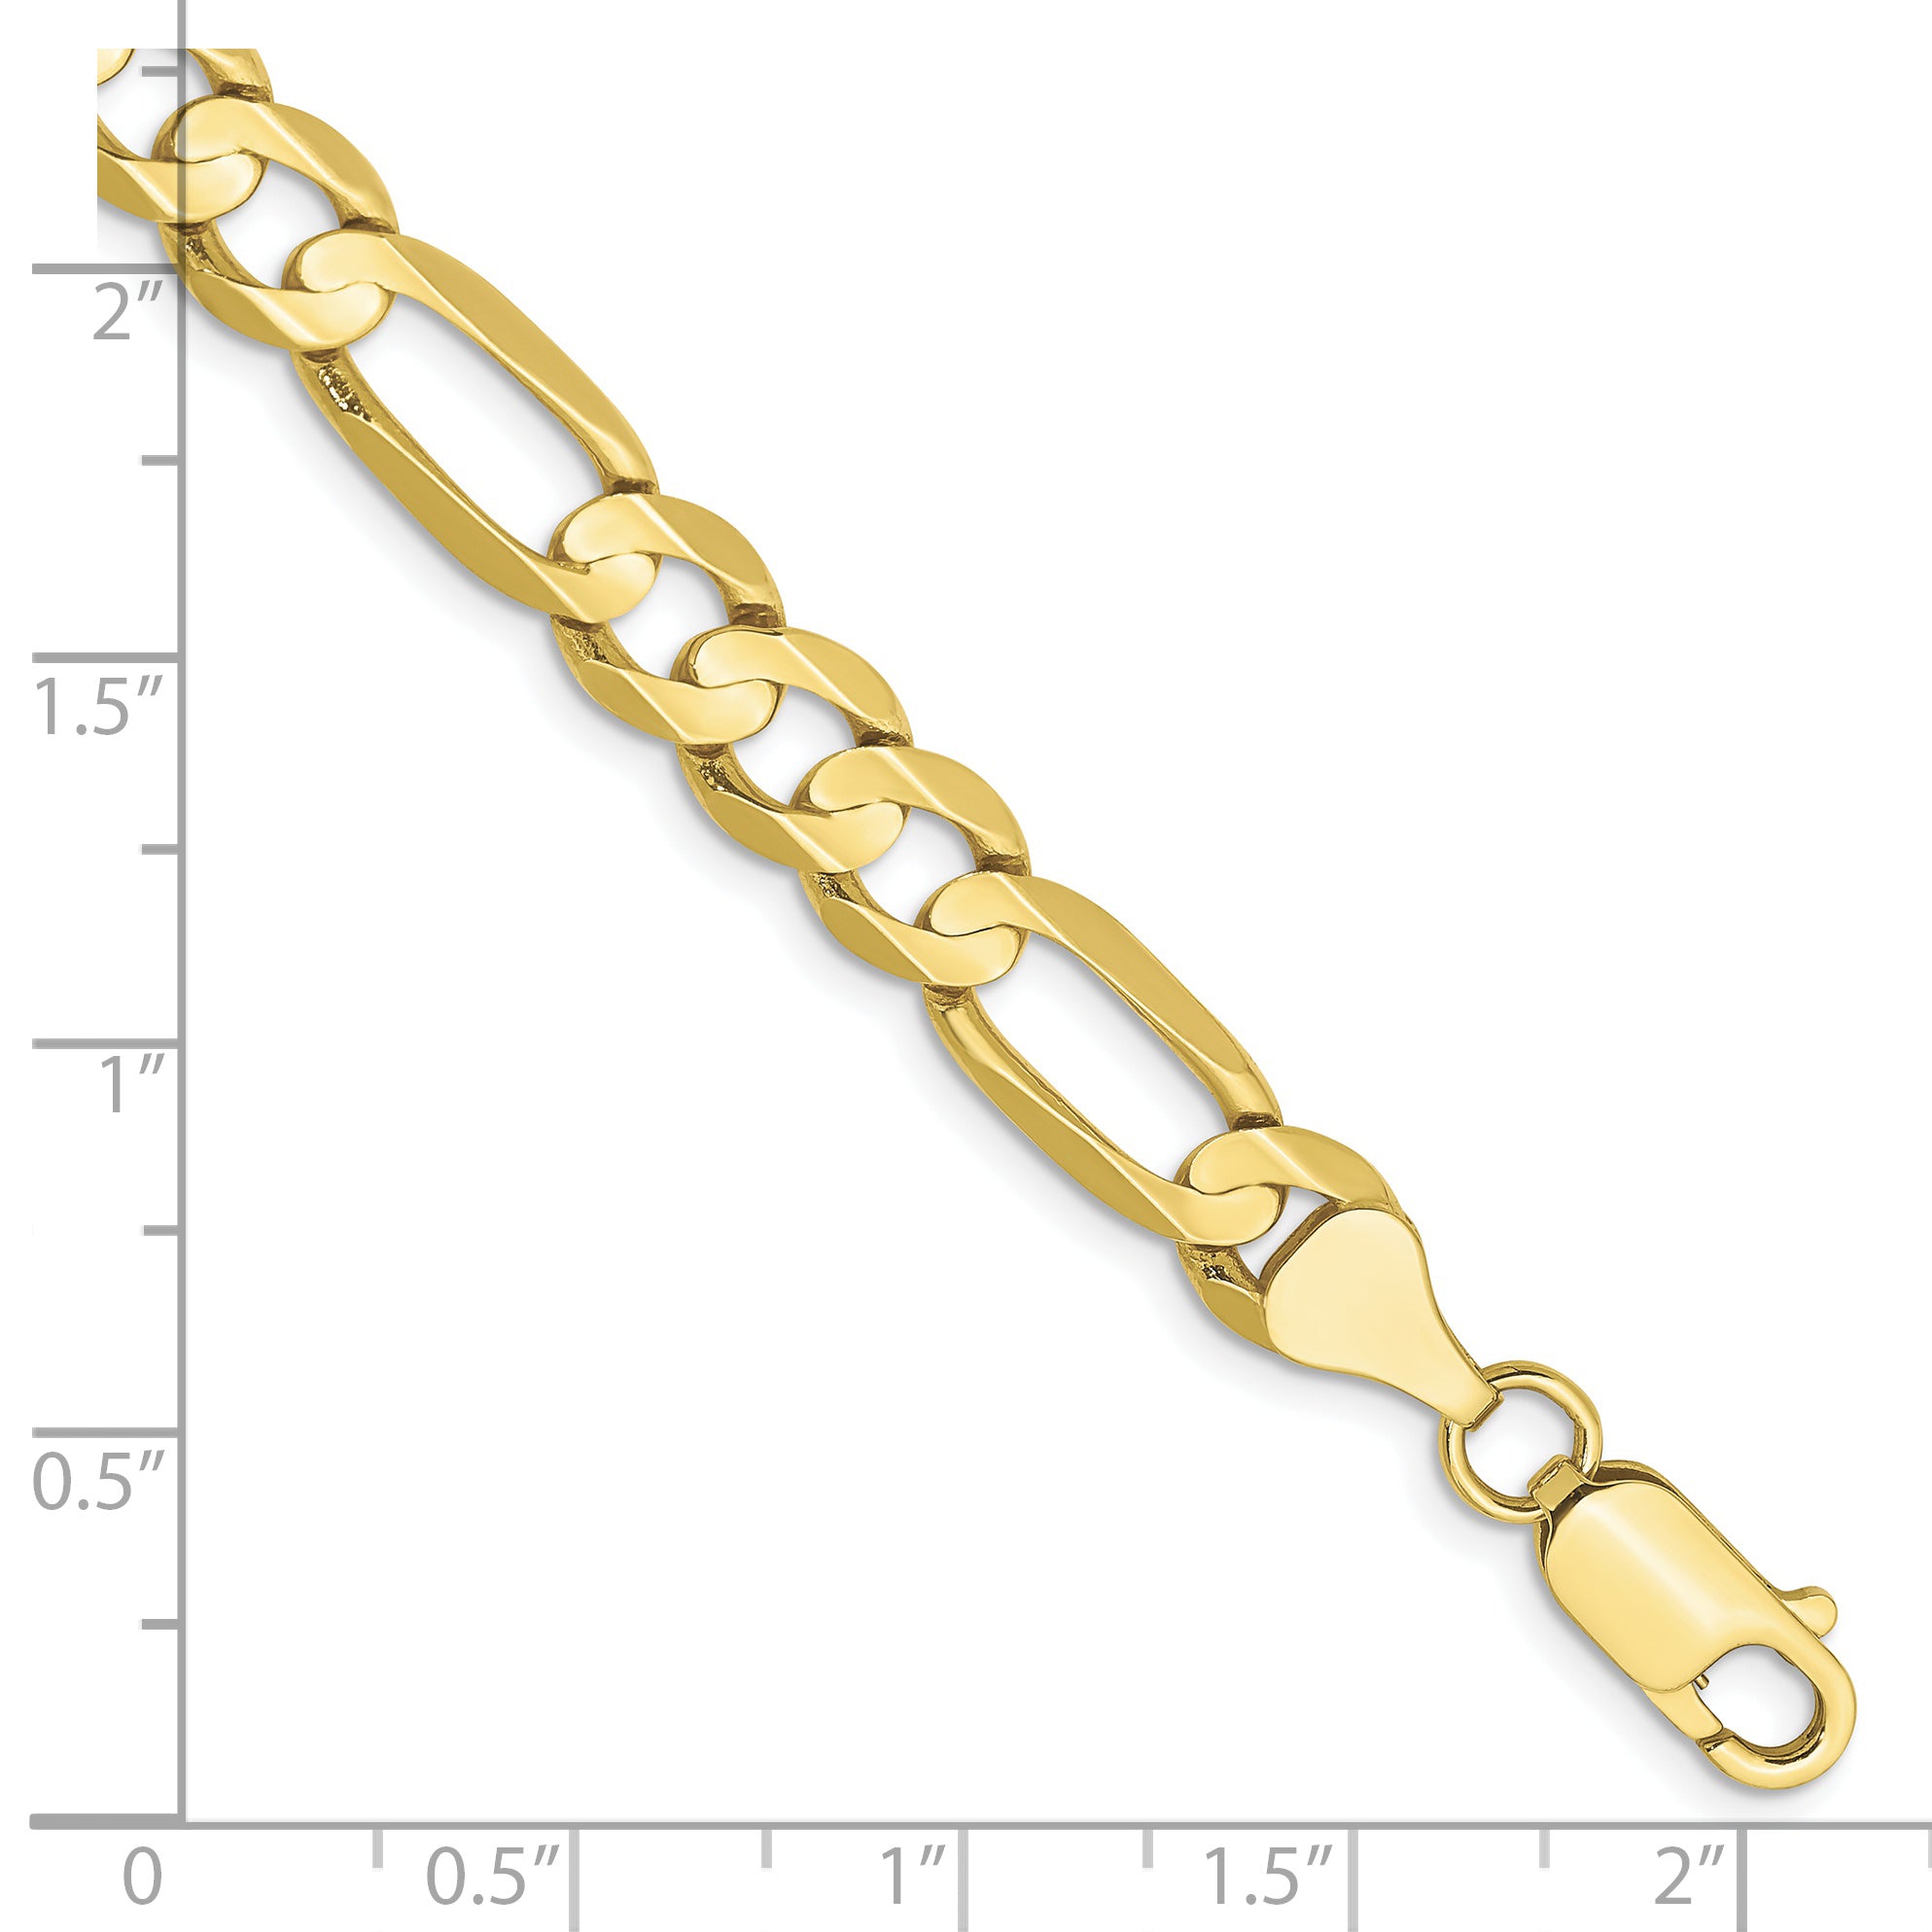 10k 6.75mm Concave Open Figaro Chain